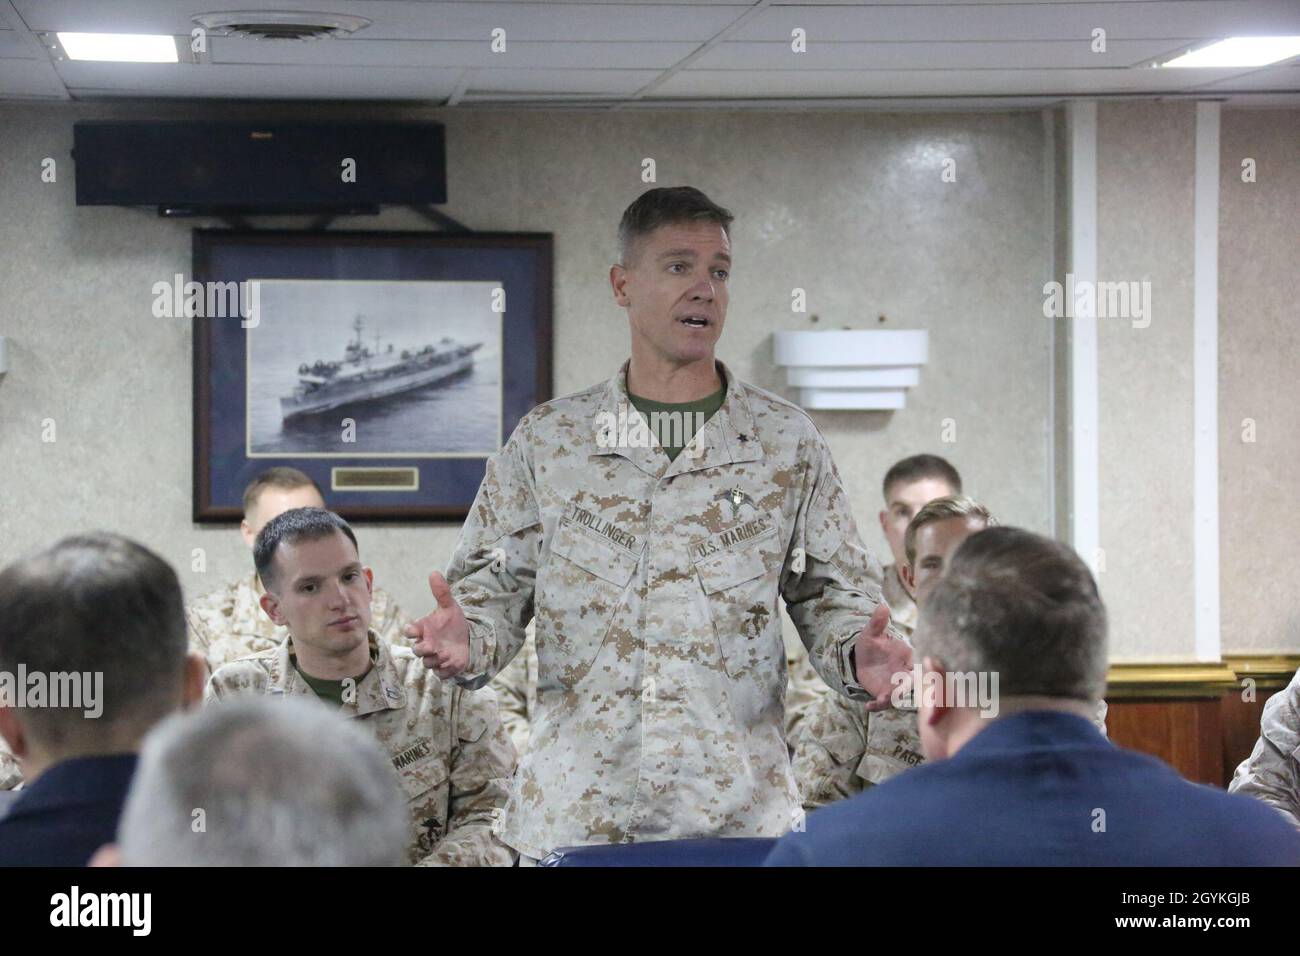 200118-M-OO419-1010 RED SEA (Jan. 18, 2020) Brig. Gen. Matthew Trollinger, commanding general of Task Force 51/5th Marine Expeditionary Brigade, speaks to Navy and Marine Corps officers aboard the amphibious assault ship USS Bataan (LHD 5). Bataan Amphibious Ready Group, with embarked 26th MEU, is deployed to the U.S. 5th Fleet area of operations in support of maritime security operations to reassure allies and partners and preserve the freedom of navigation and the free flow of commerce in the region. (U.S. Marine Corps photo by Cpl. Nathan Reyes) Stock Photo